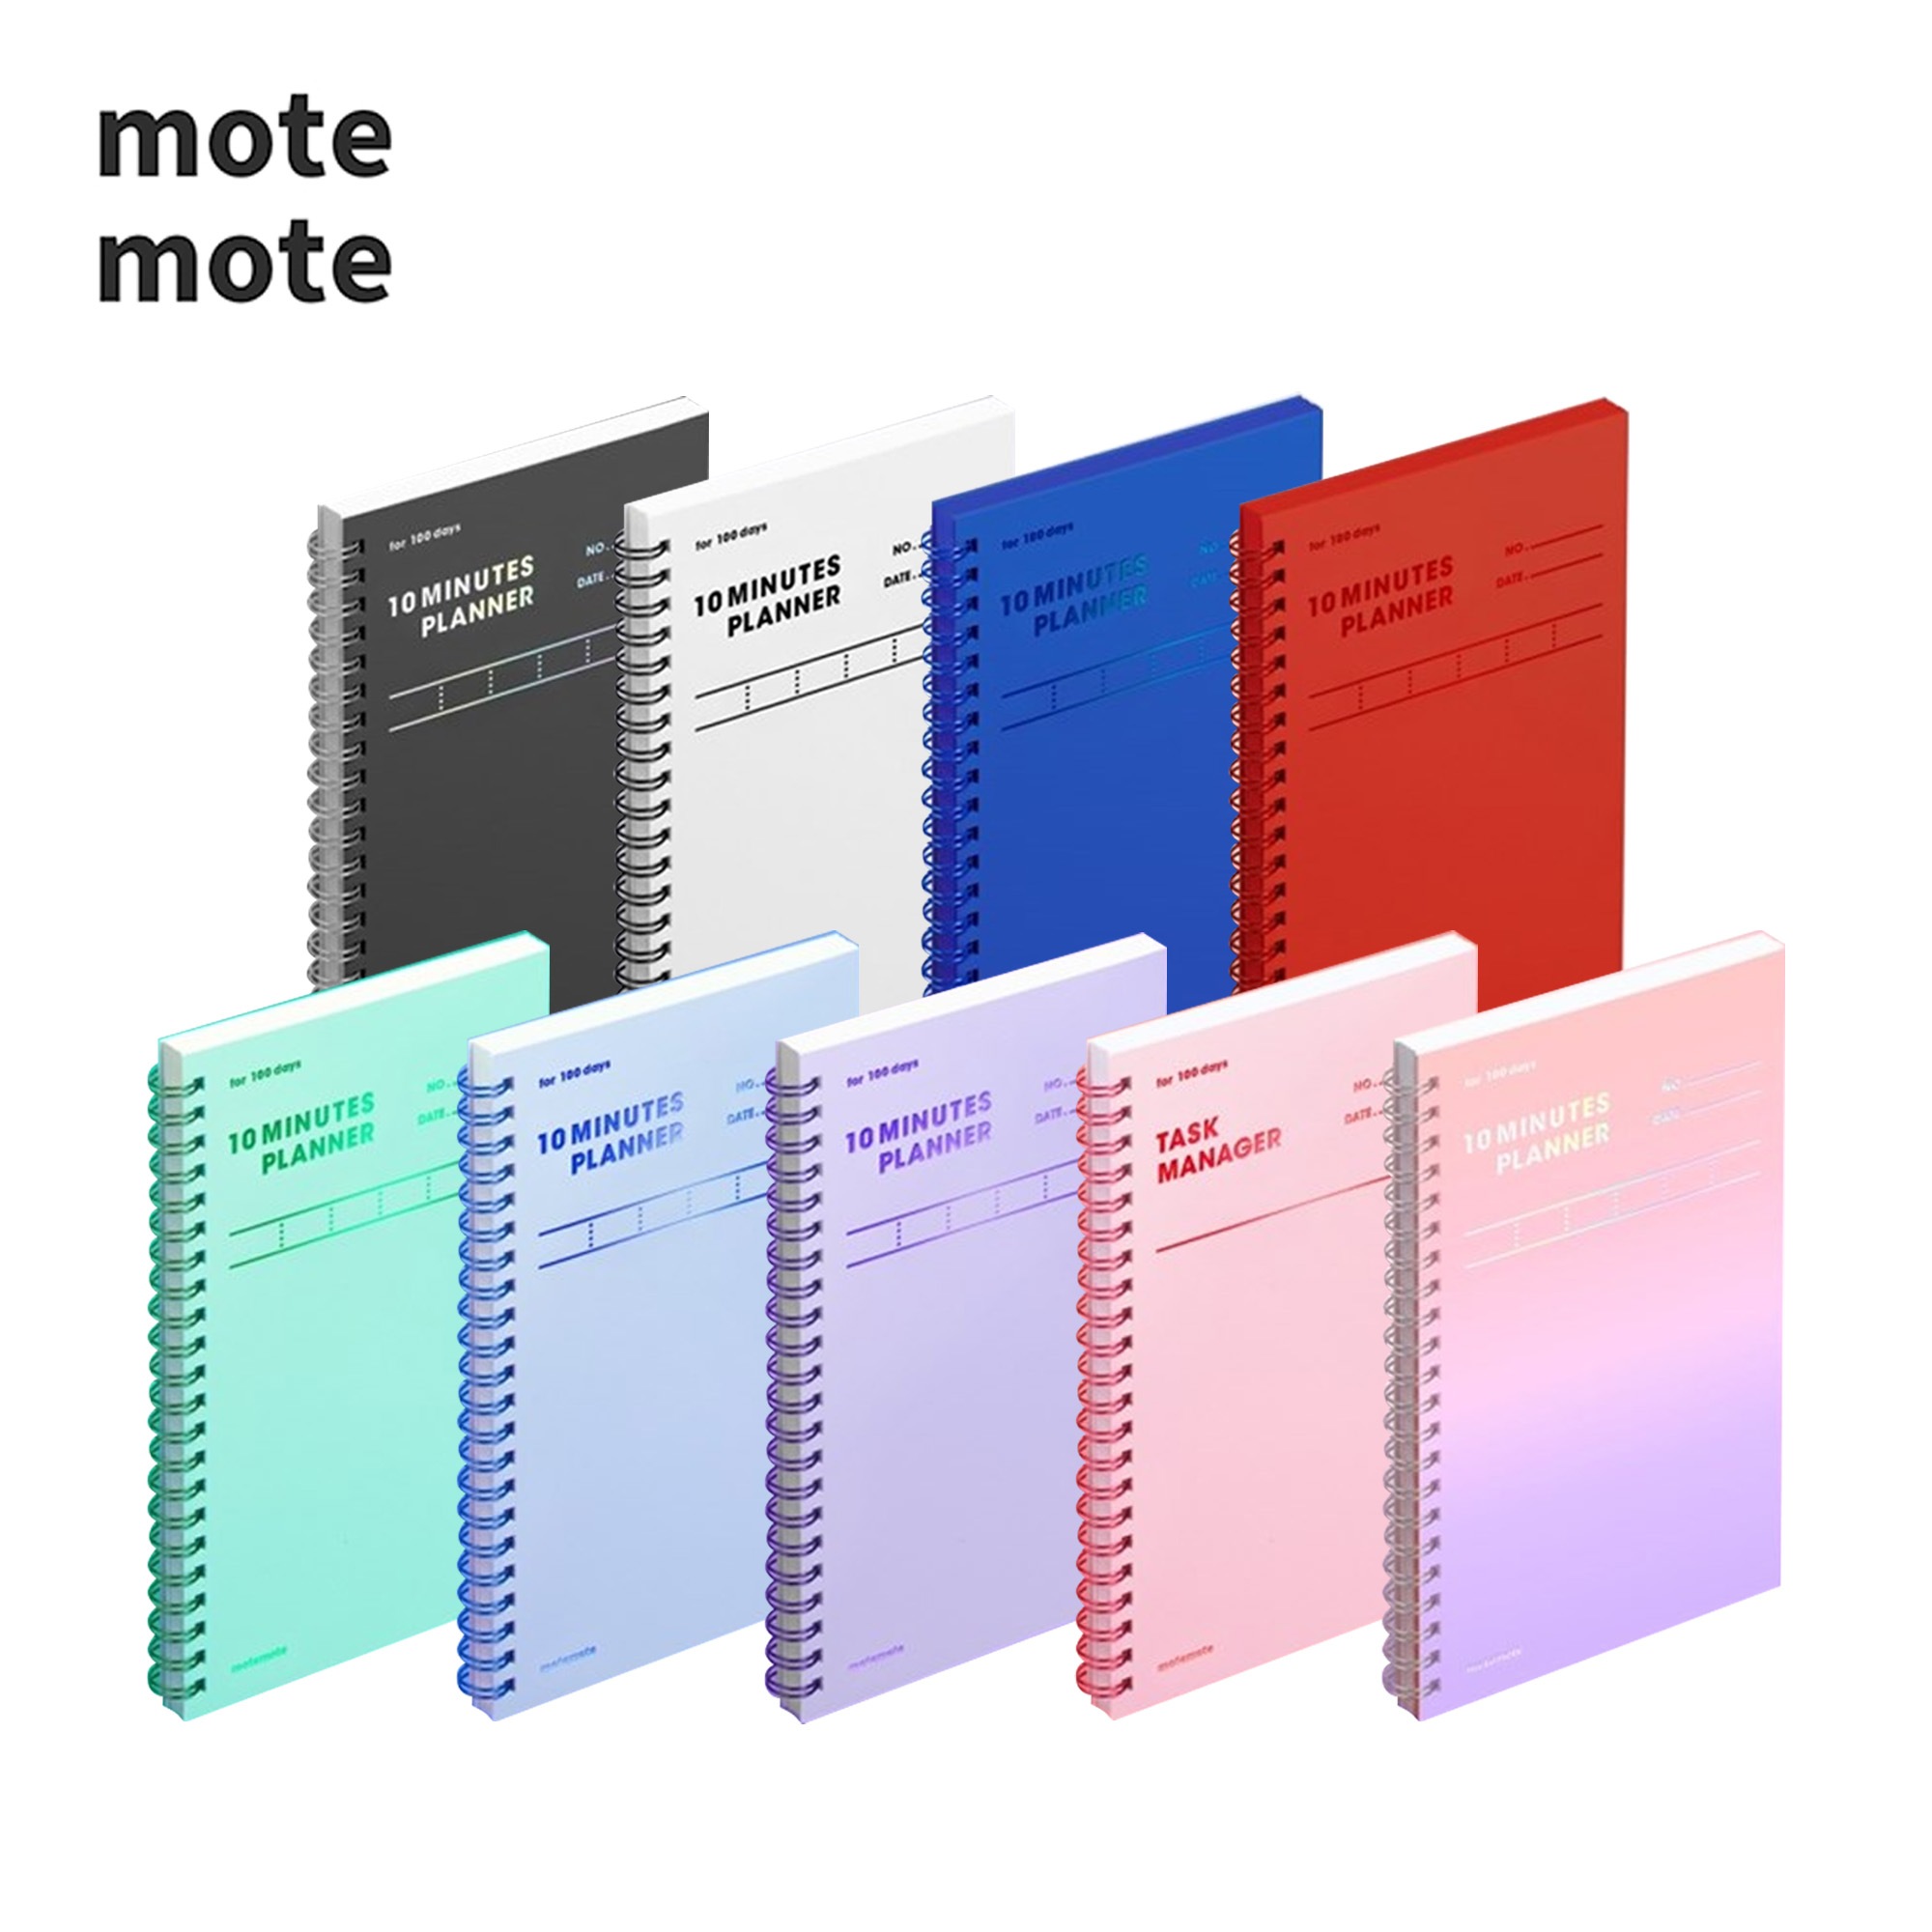 Violet Study Planner By Motemote 10 Minutes Planner for 100 Days 